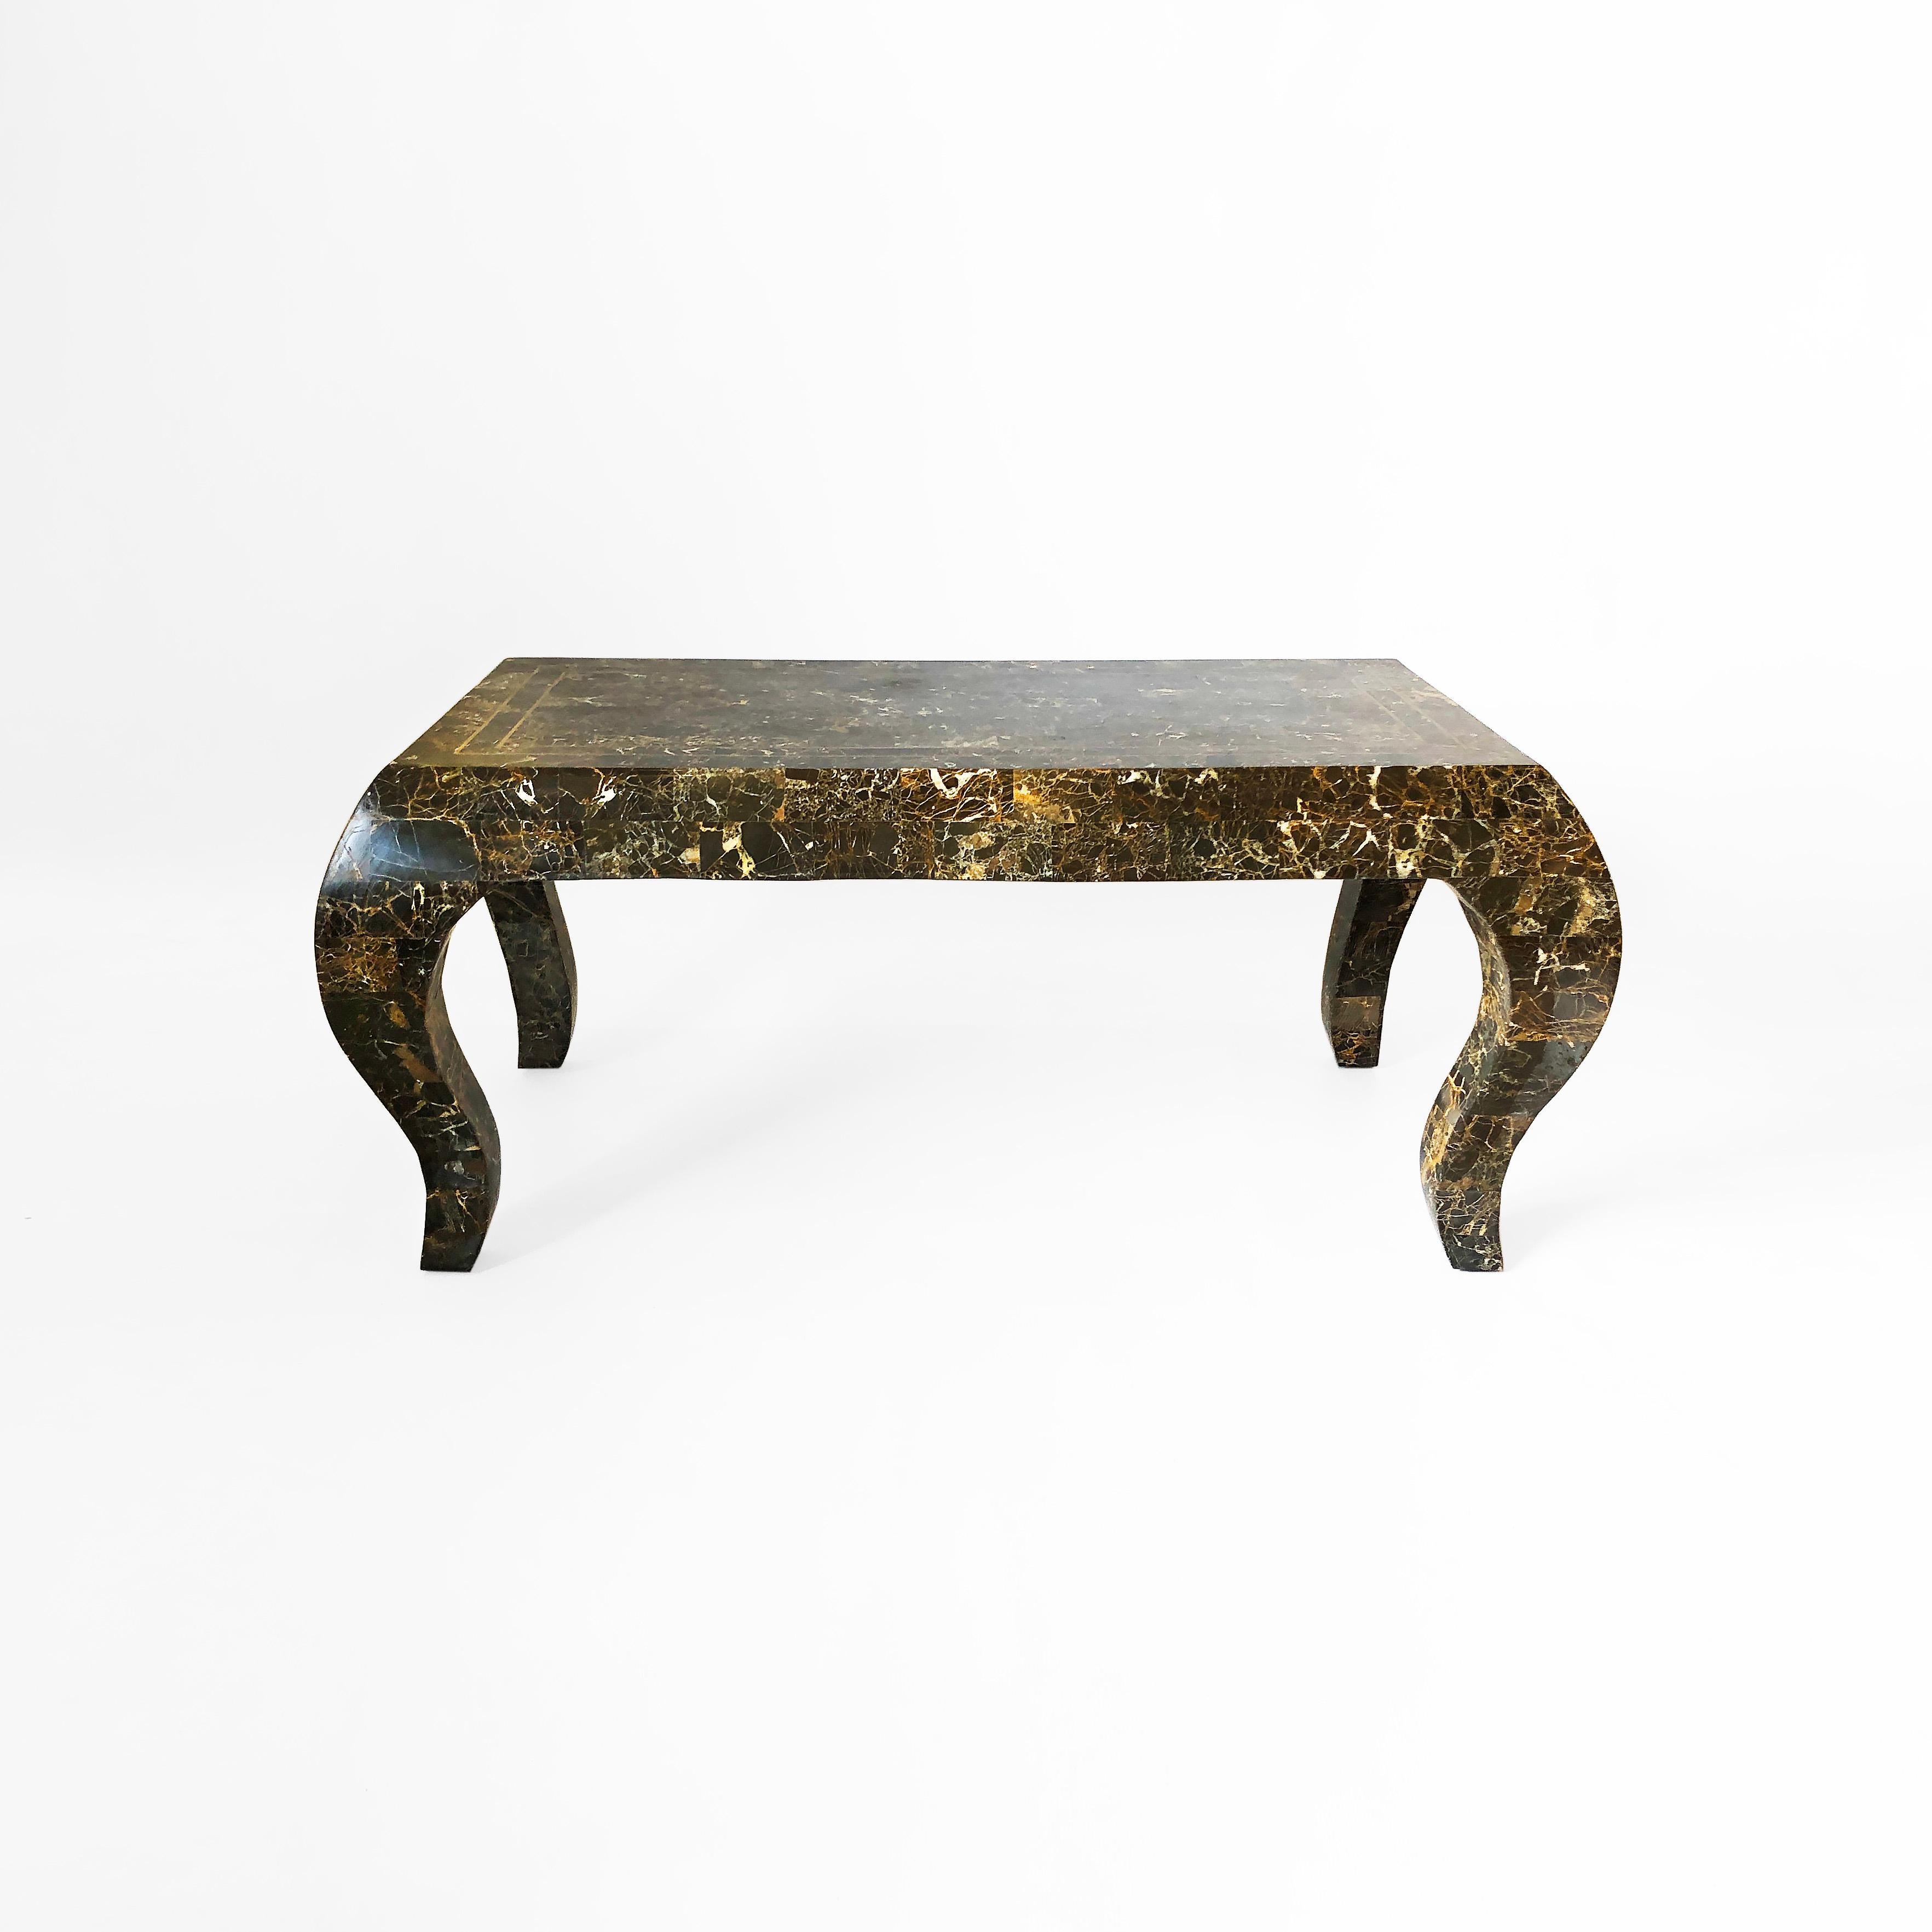 Maitland Smith Tessellated Marble Coffee Table 1980s Vintage Hollywood Regency In Good Condition For Sale In London, GB